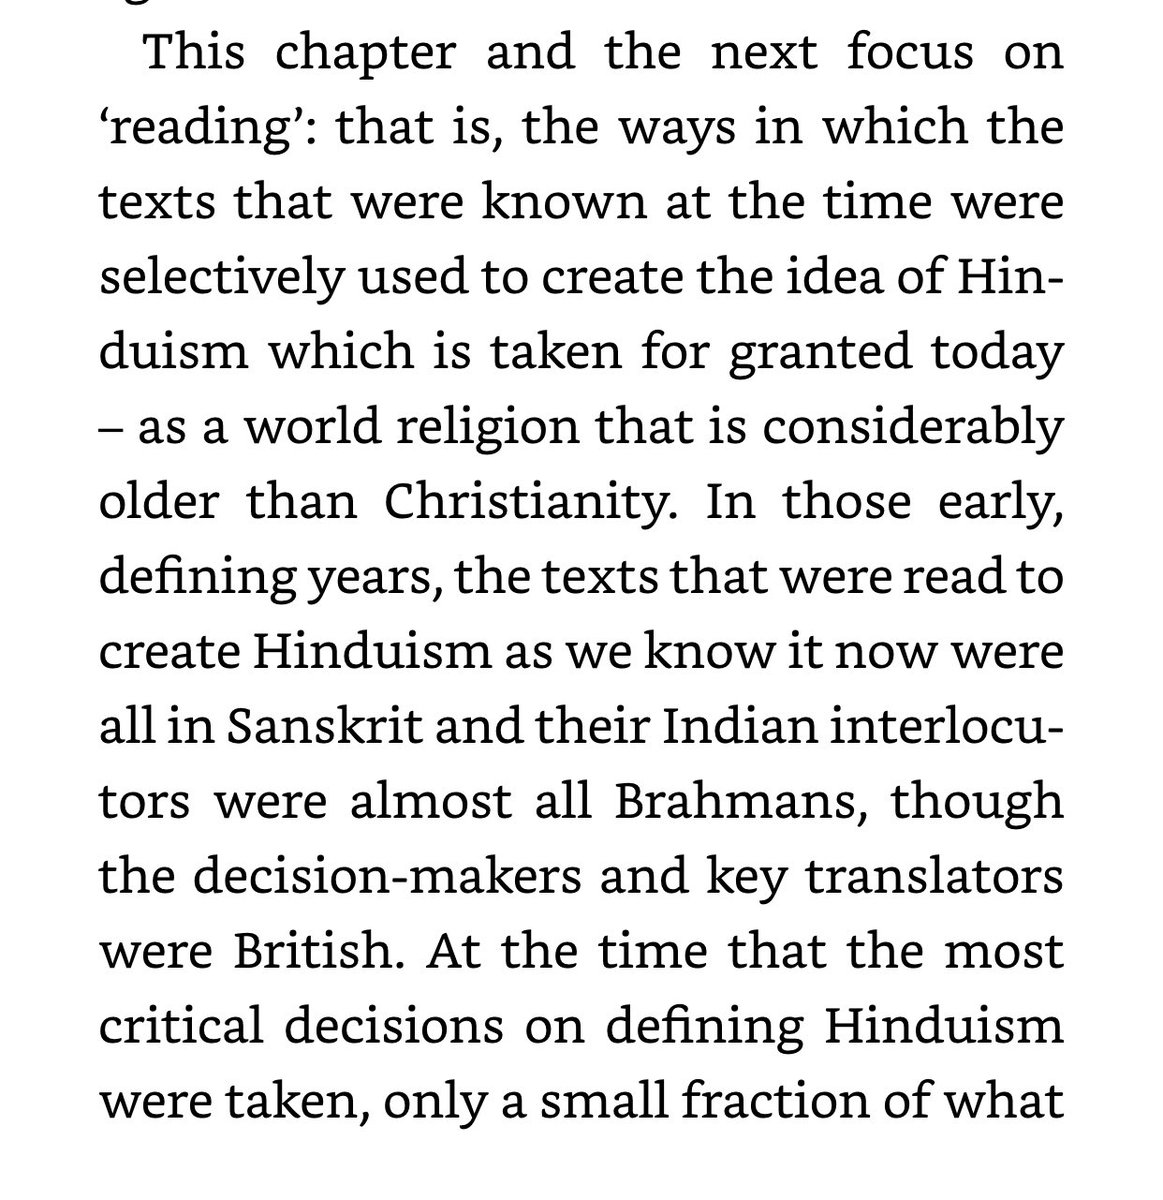 Quotes from the the Manusmriti are on exam board specs. We could help our students evaluate those teachings by looking at how they have been viewed by key figures. I have done this but never went beyond Gandhi. Looking at who creates a religious canon is always interesting.